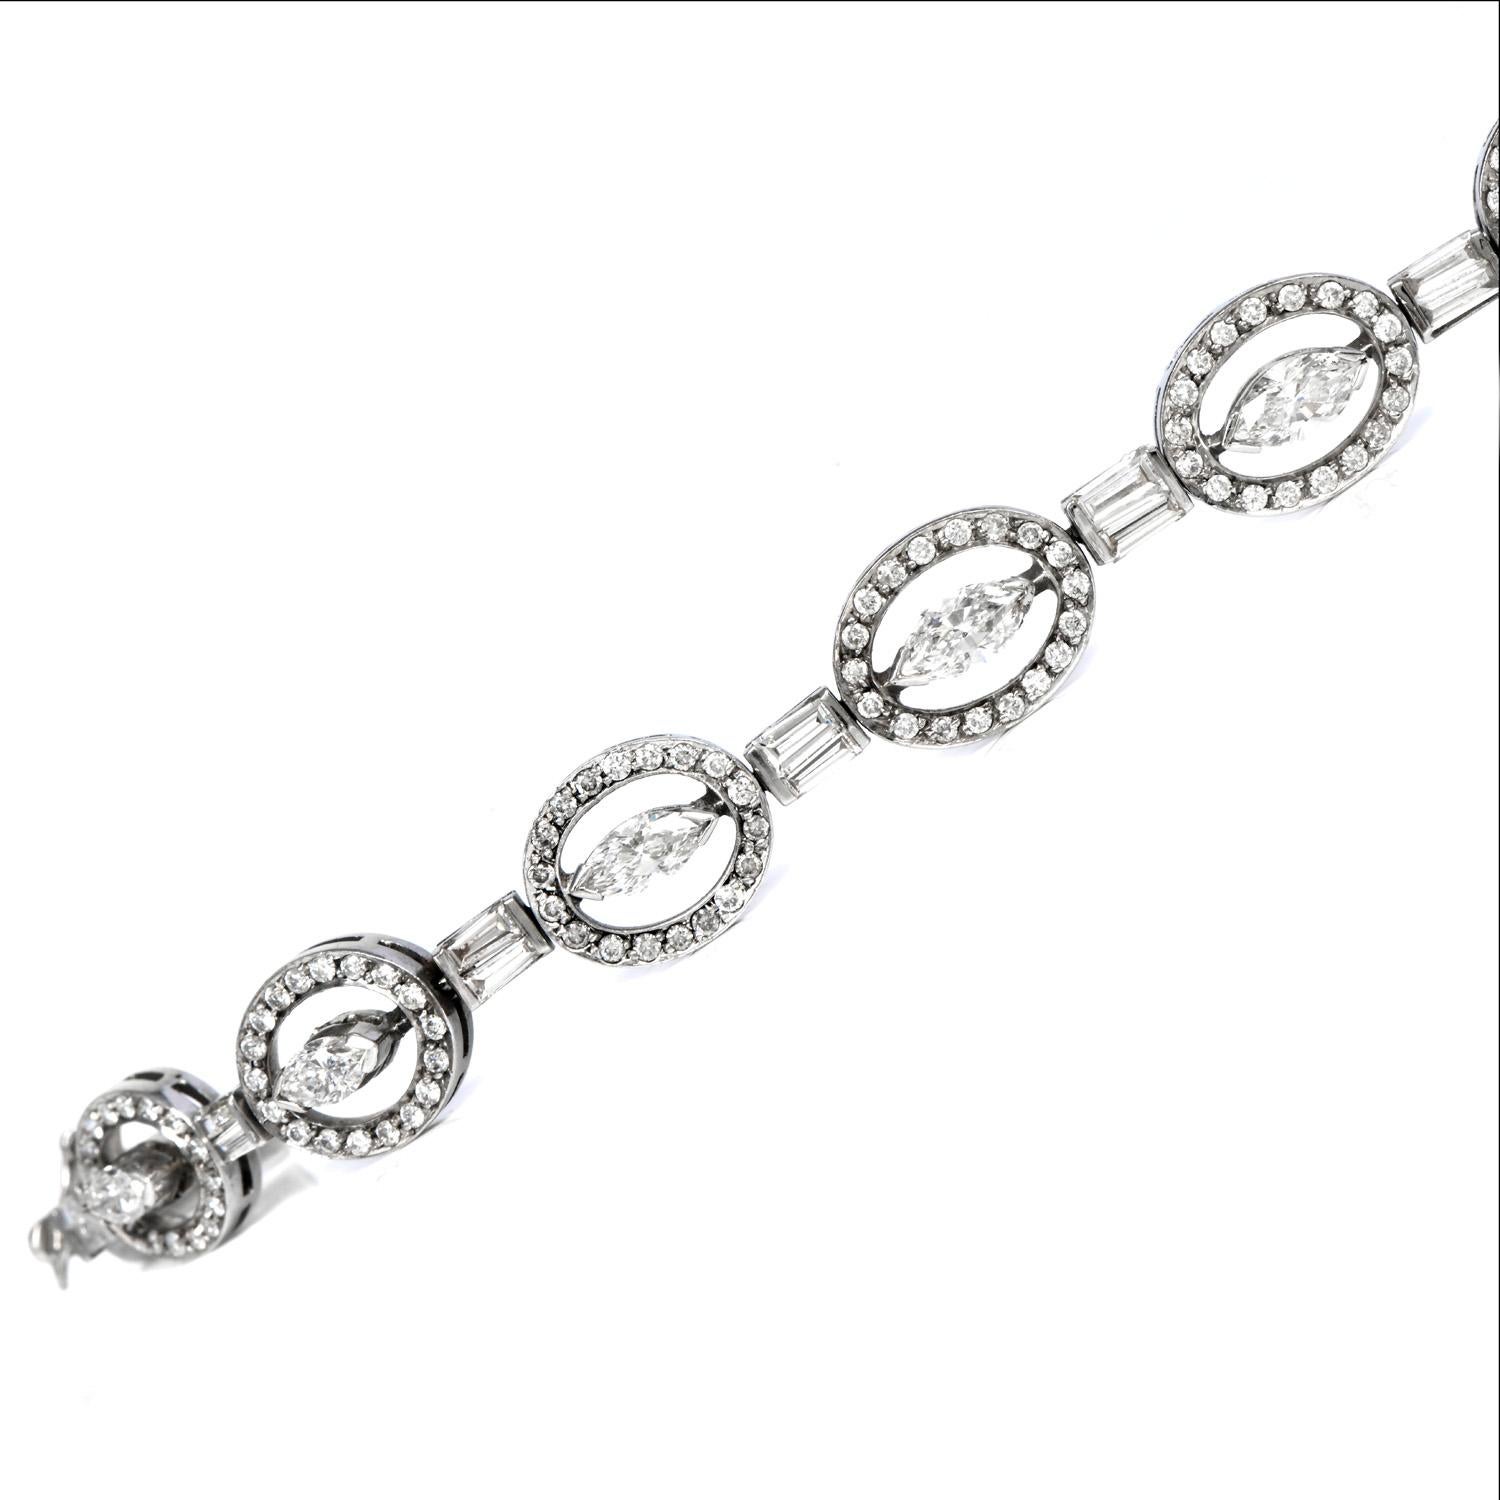 Estate 6.70cts Diamond 18K White Gold Oval Style Link Bracelet In Excellent Condition For Sale In Miami, FL